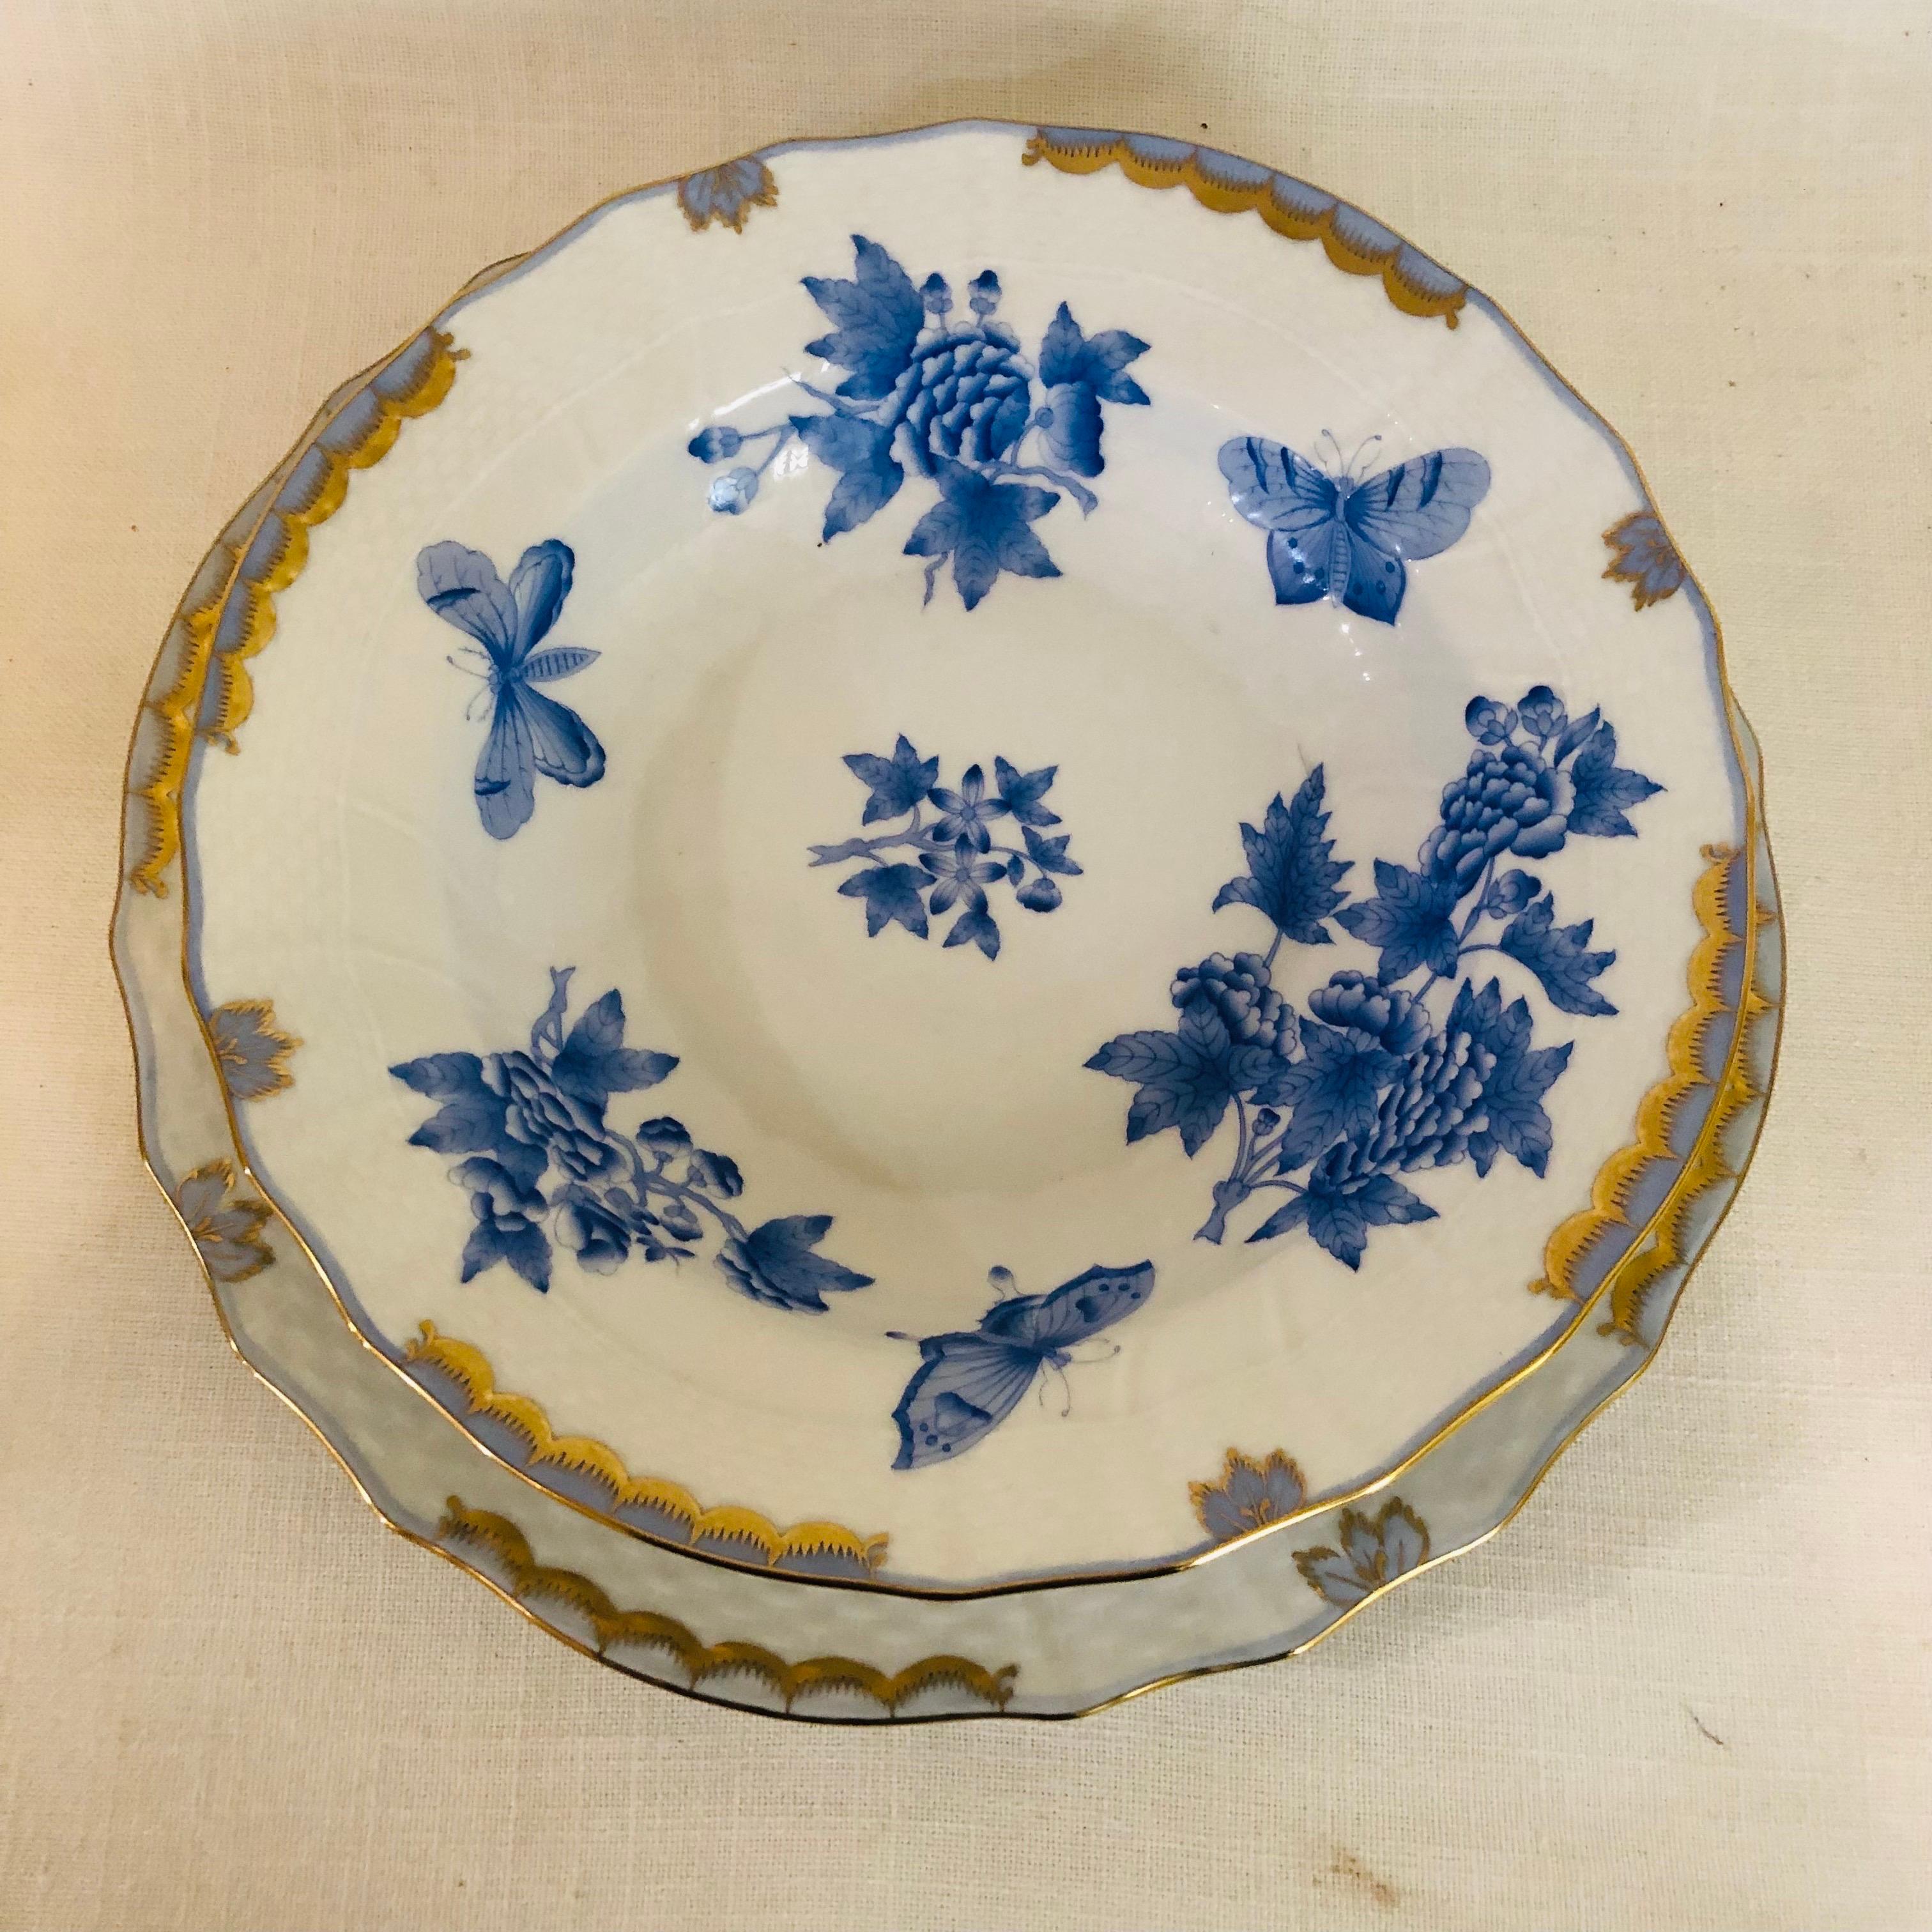 Extensive Herend Fortuna Dinner Service Painted with Butterflies and Flowers For Sale 5